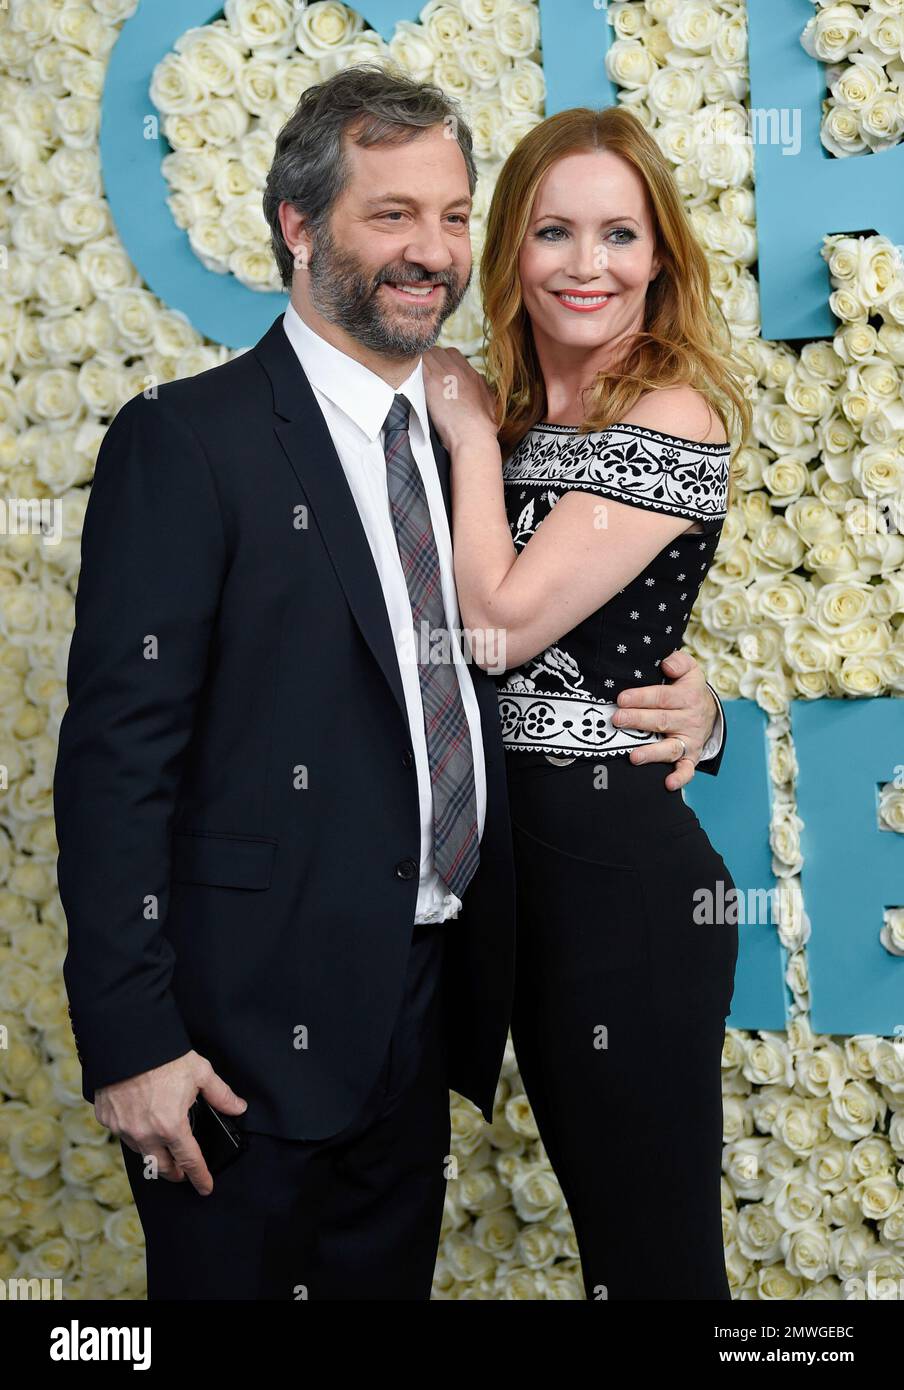 Judd Apatow Directs Wife Leslie Mann, Daughter Iris as Quarantined